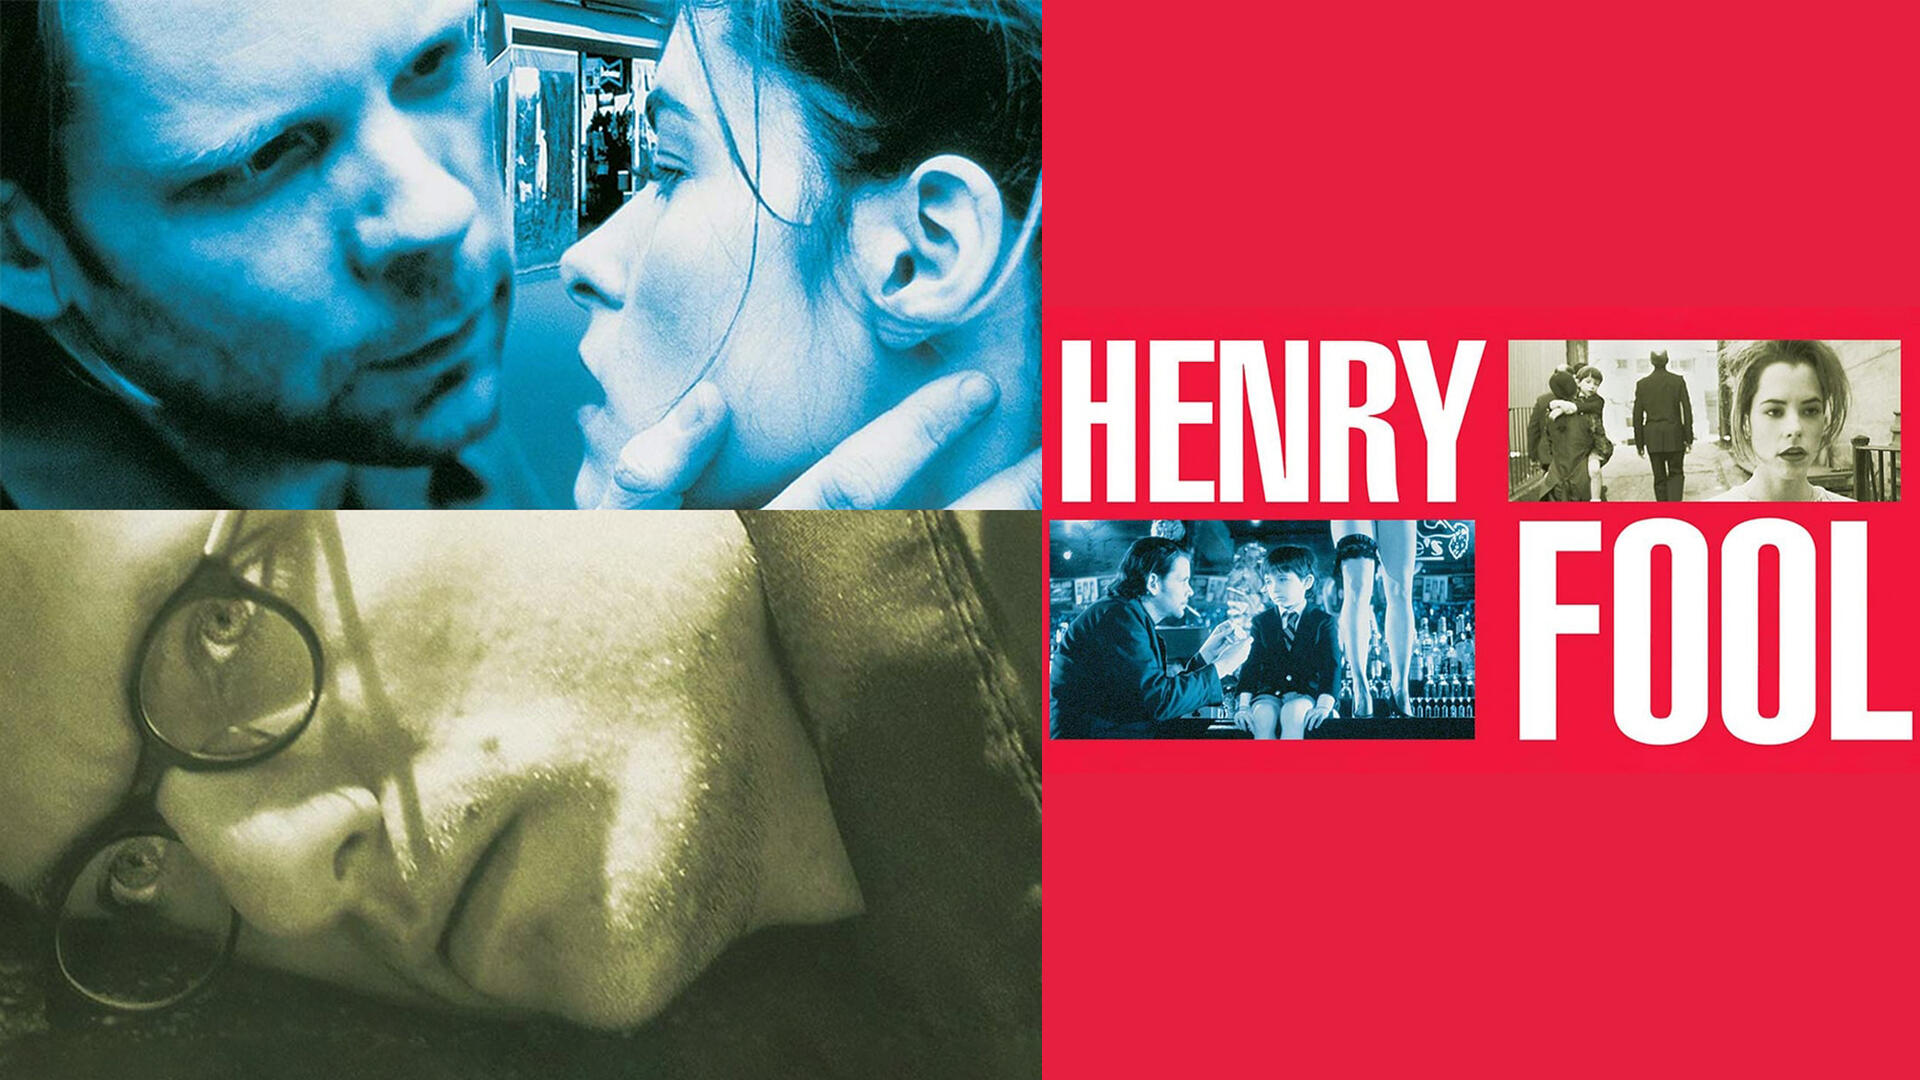 43-facts-about-the-movie-henry-fool